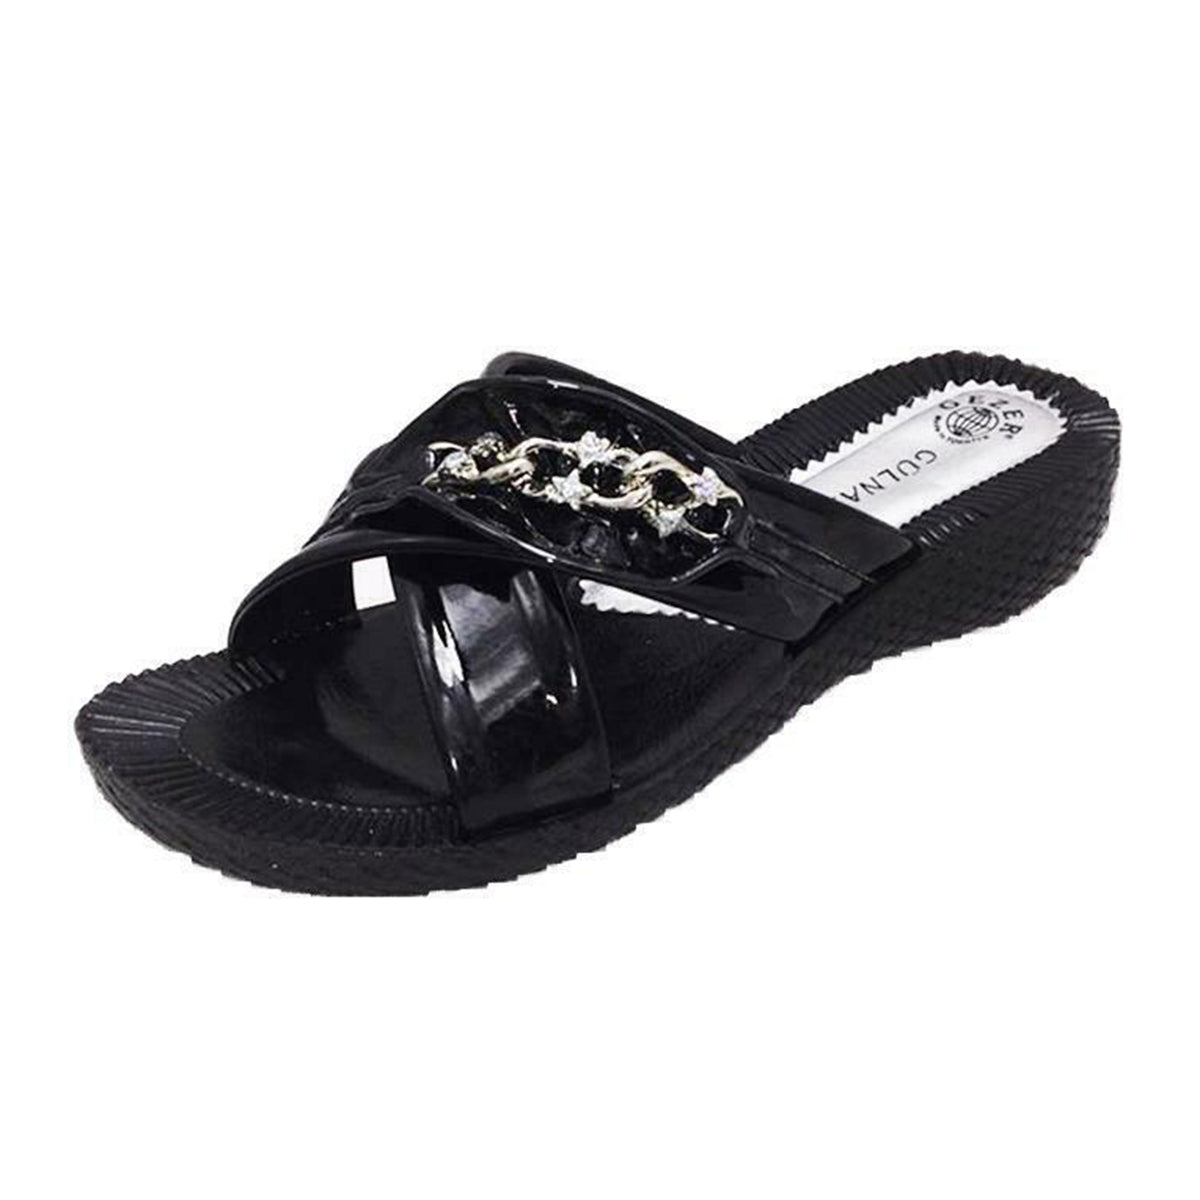 Patent Low wedge sandals with DIAMANTE chain